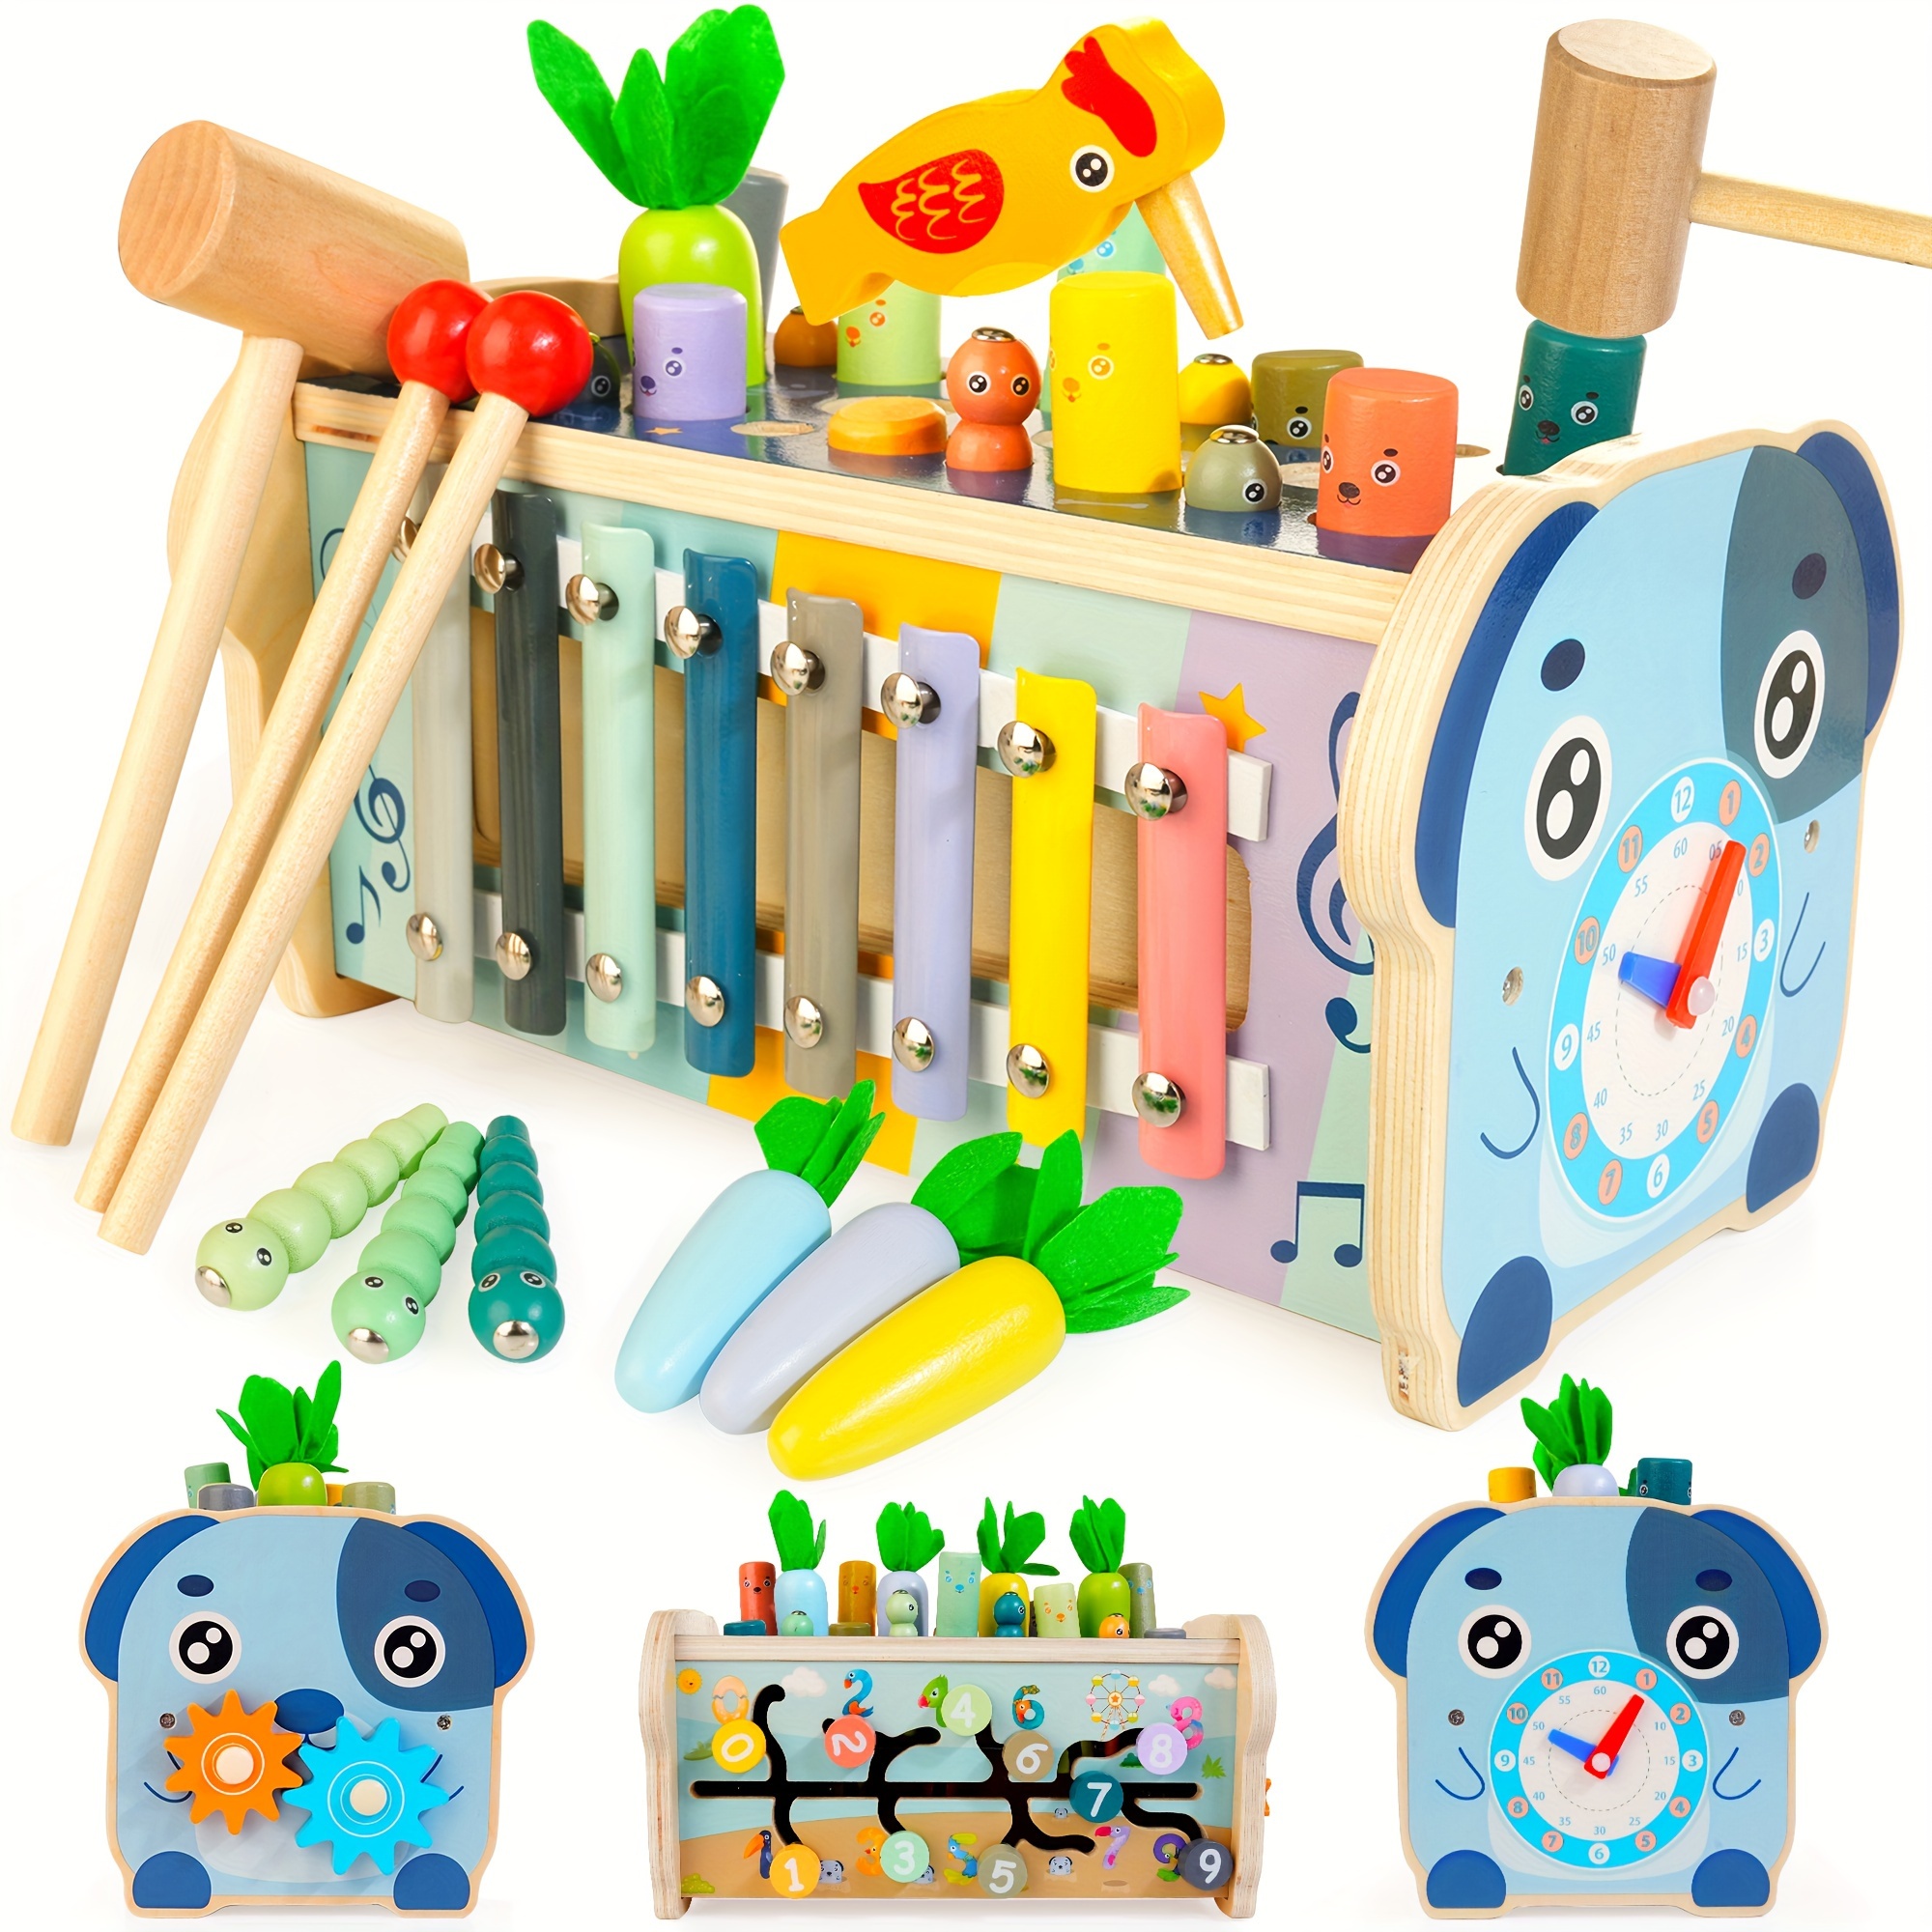 

Montessori Toys For 1 Year Older, 7 In 1 Wooden Hammering Pounding Toy With Xylophone, Carrot Harvest Game, Fine Motor Skills Learning Developmental Toys Gift For Boys Girls Age 1 2 3